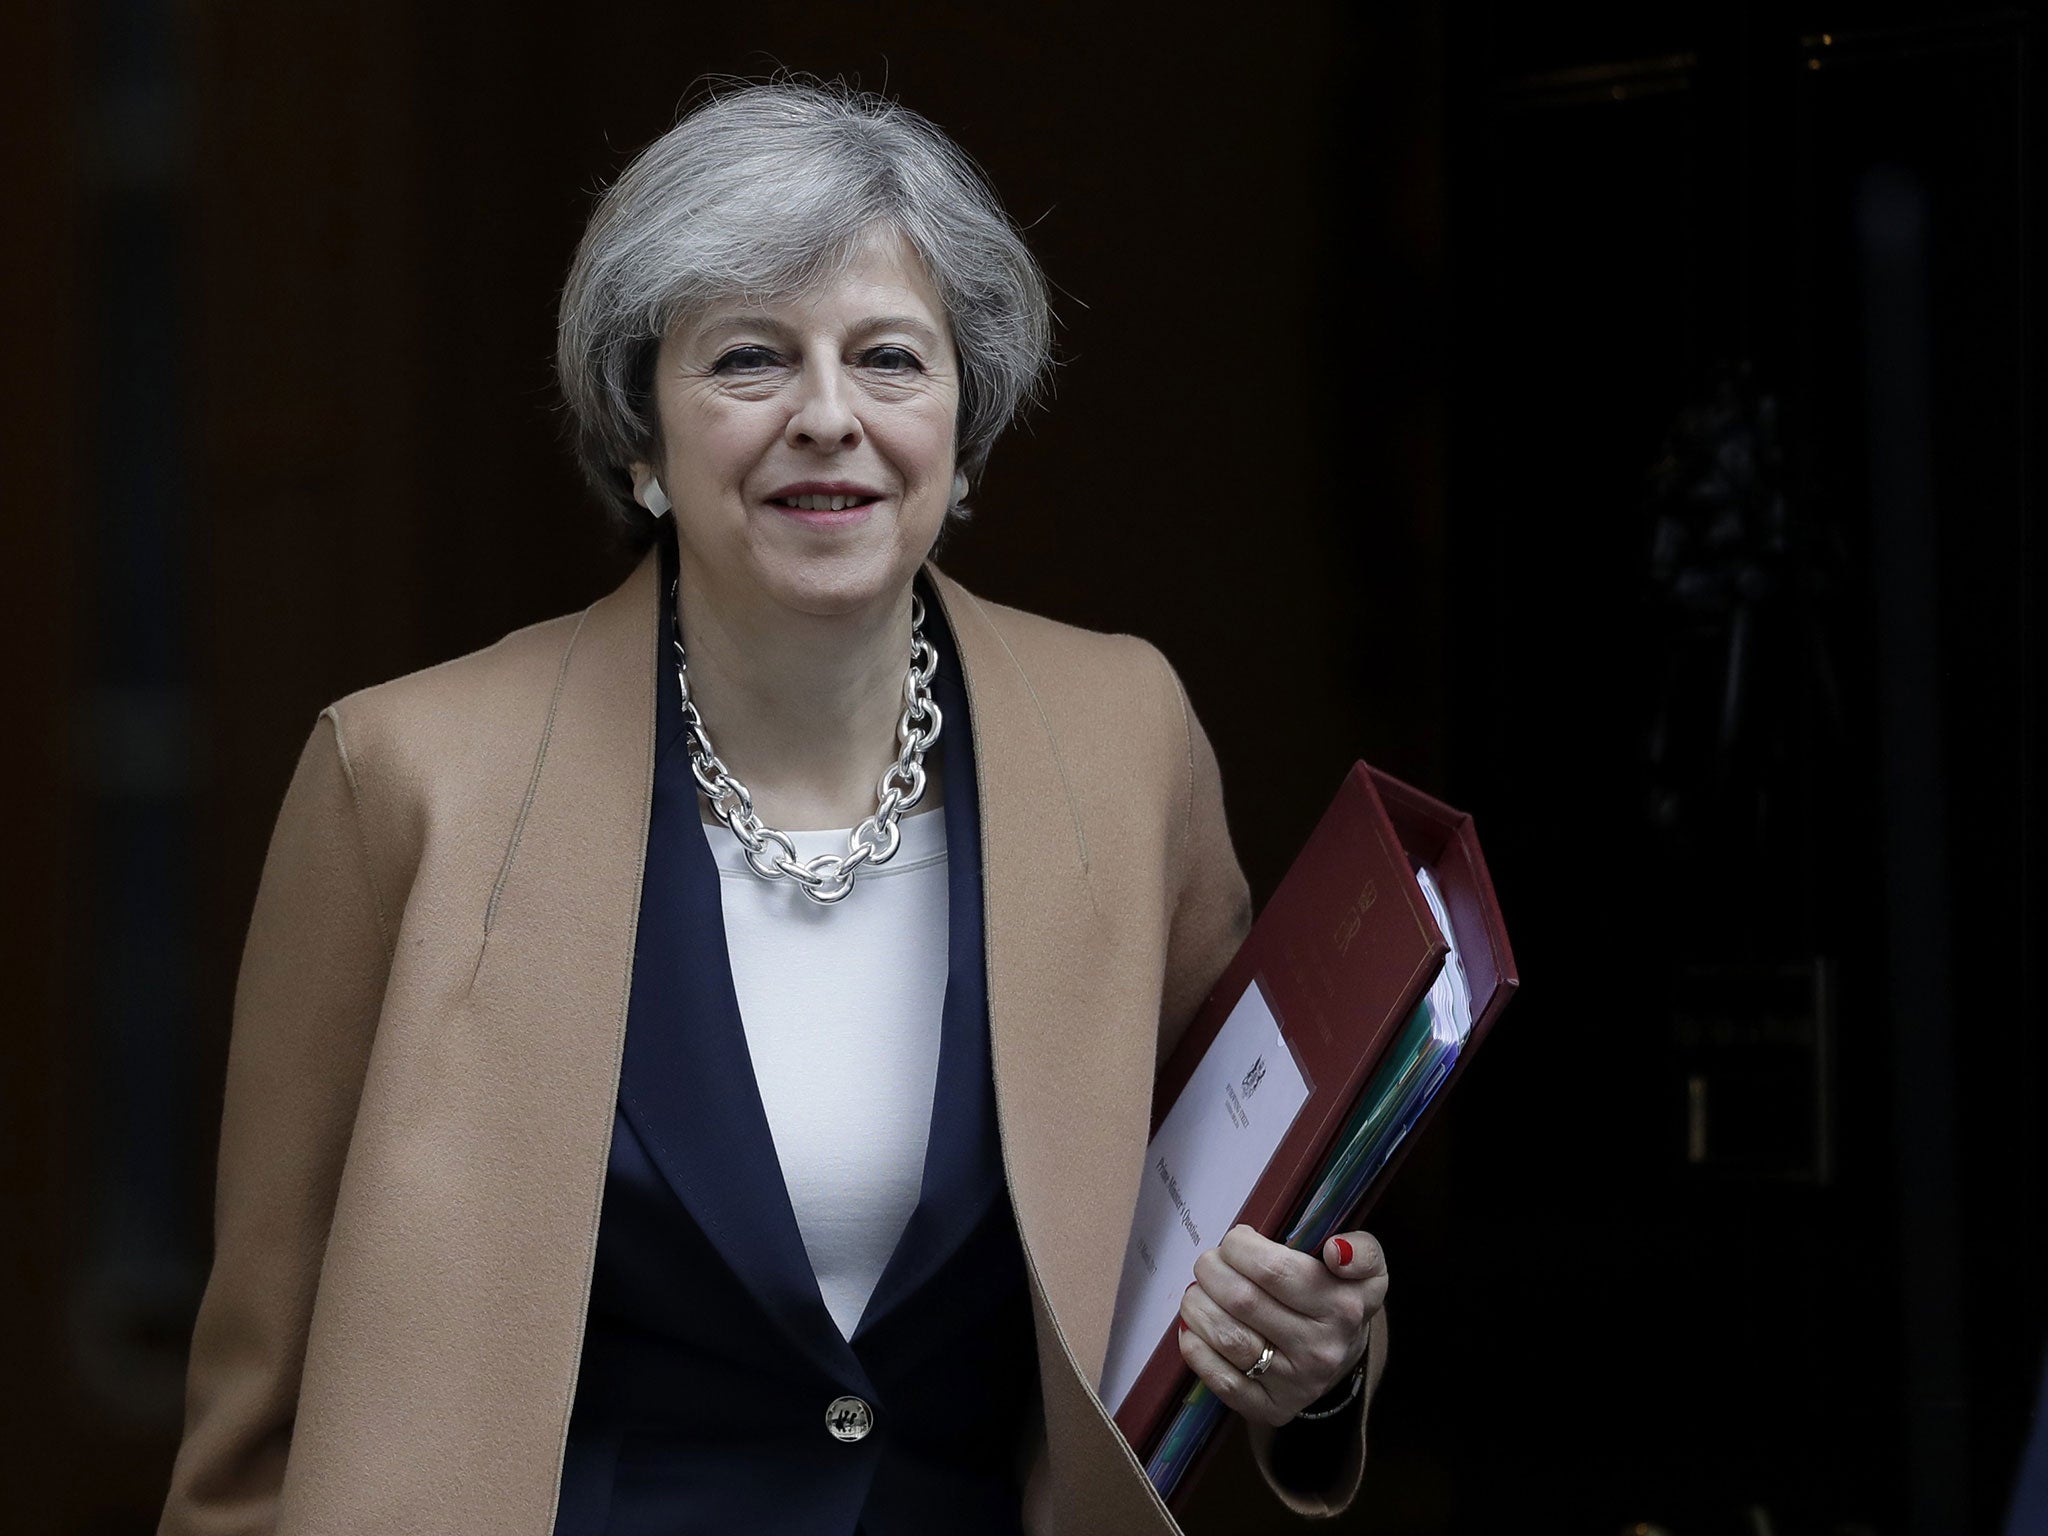 Prime Minister Theresa May leaves 10 Downing Street in London, to attend Prime Minister's Questions at the Houses of Parliament, Wednesday, 15 March, 2017